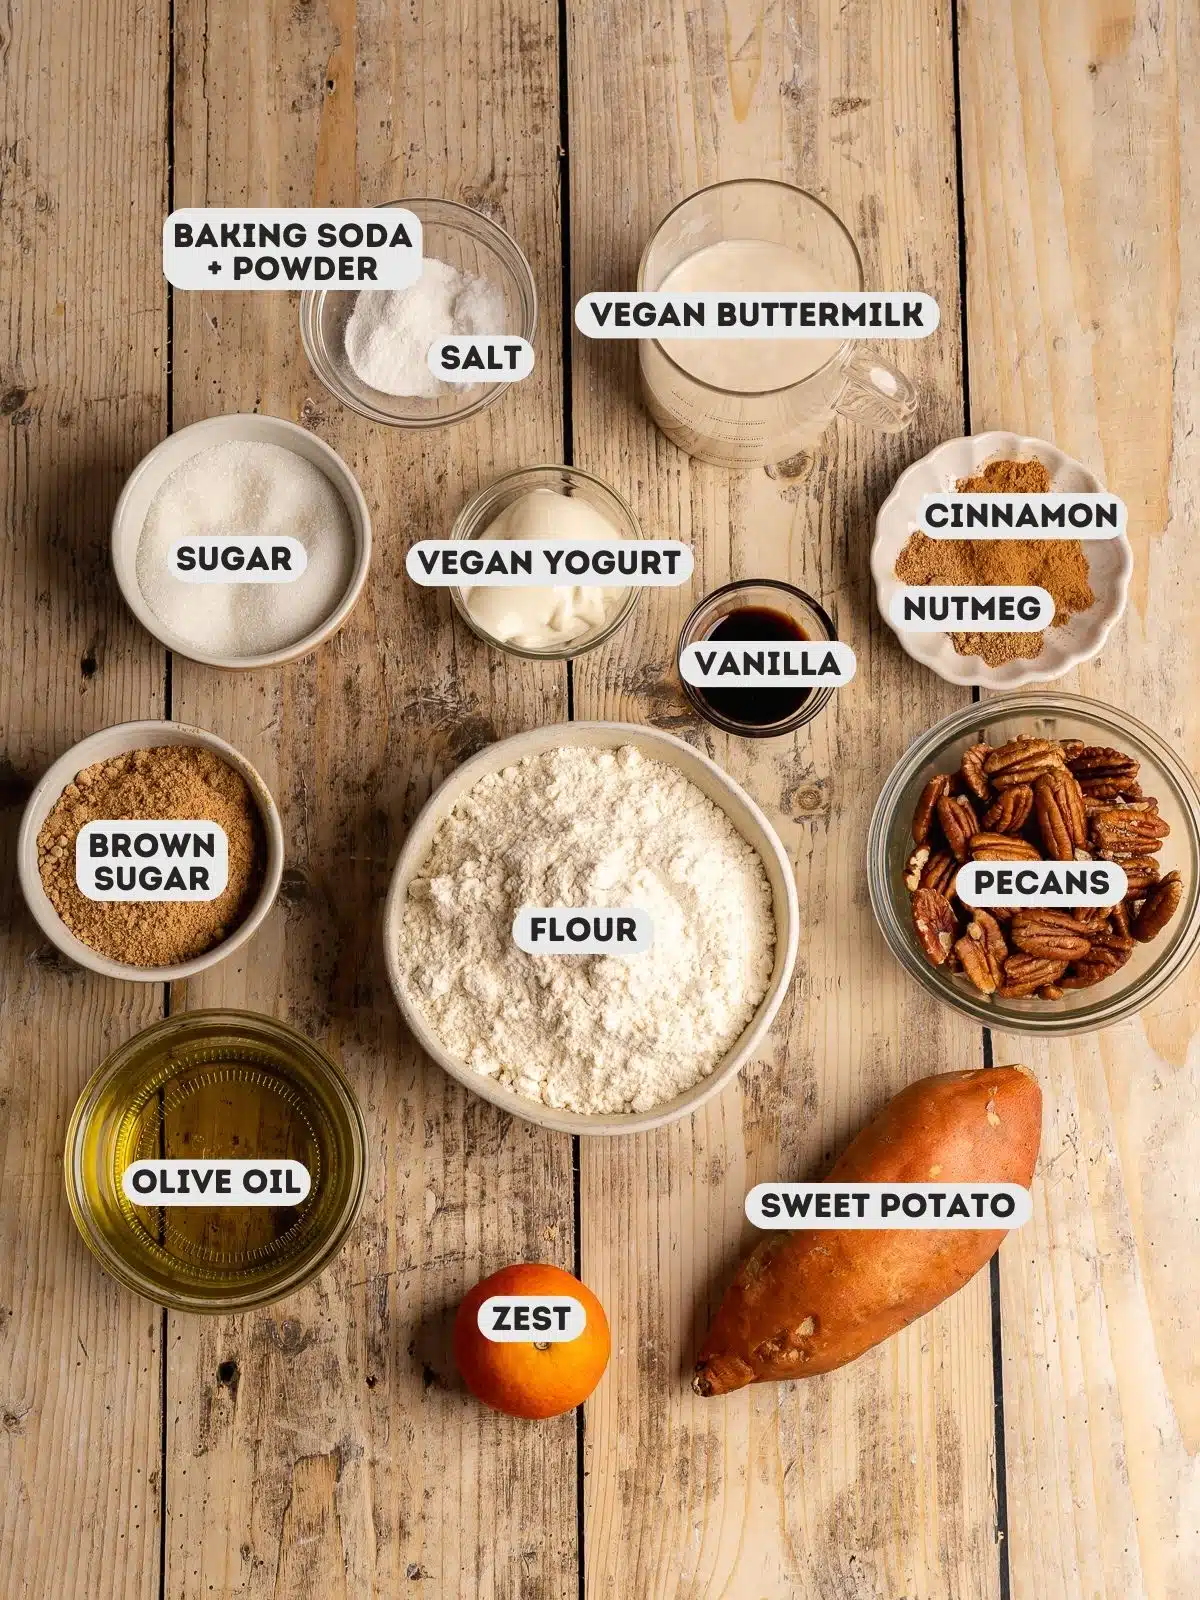 ingredients to make sweet potato loaf cake measured out in bowls on a wooden table with a text overlay.